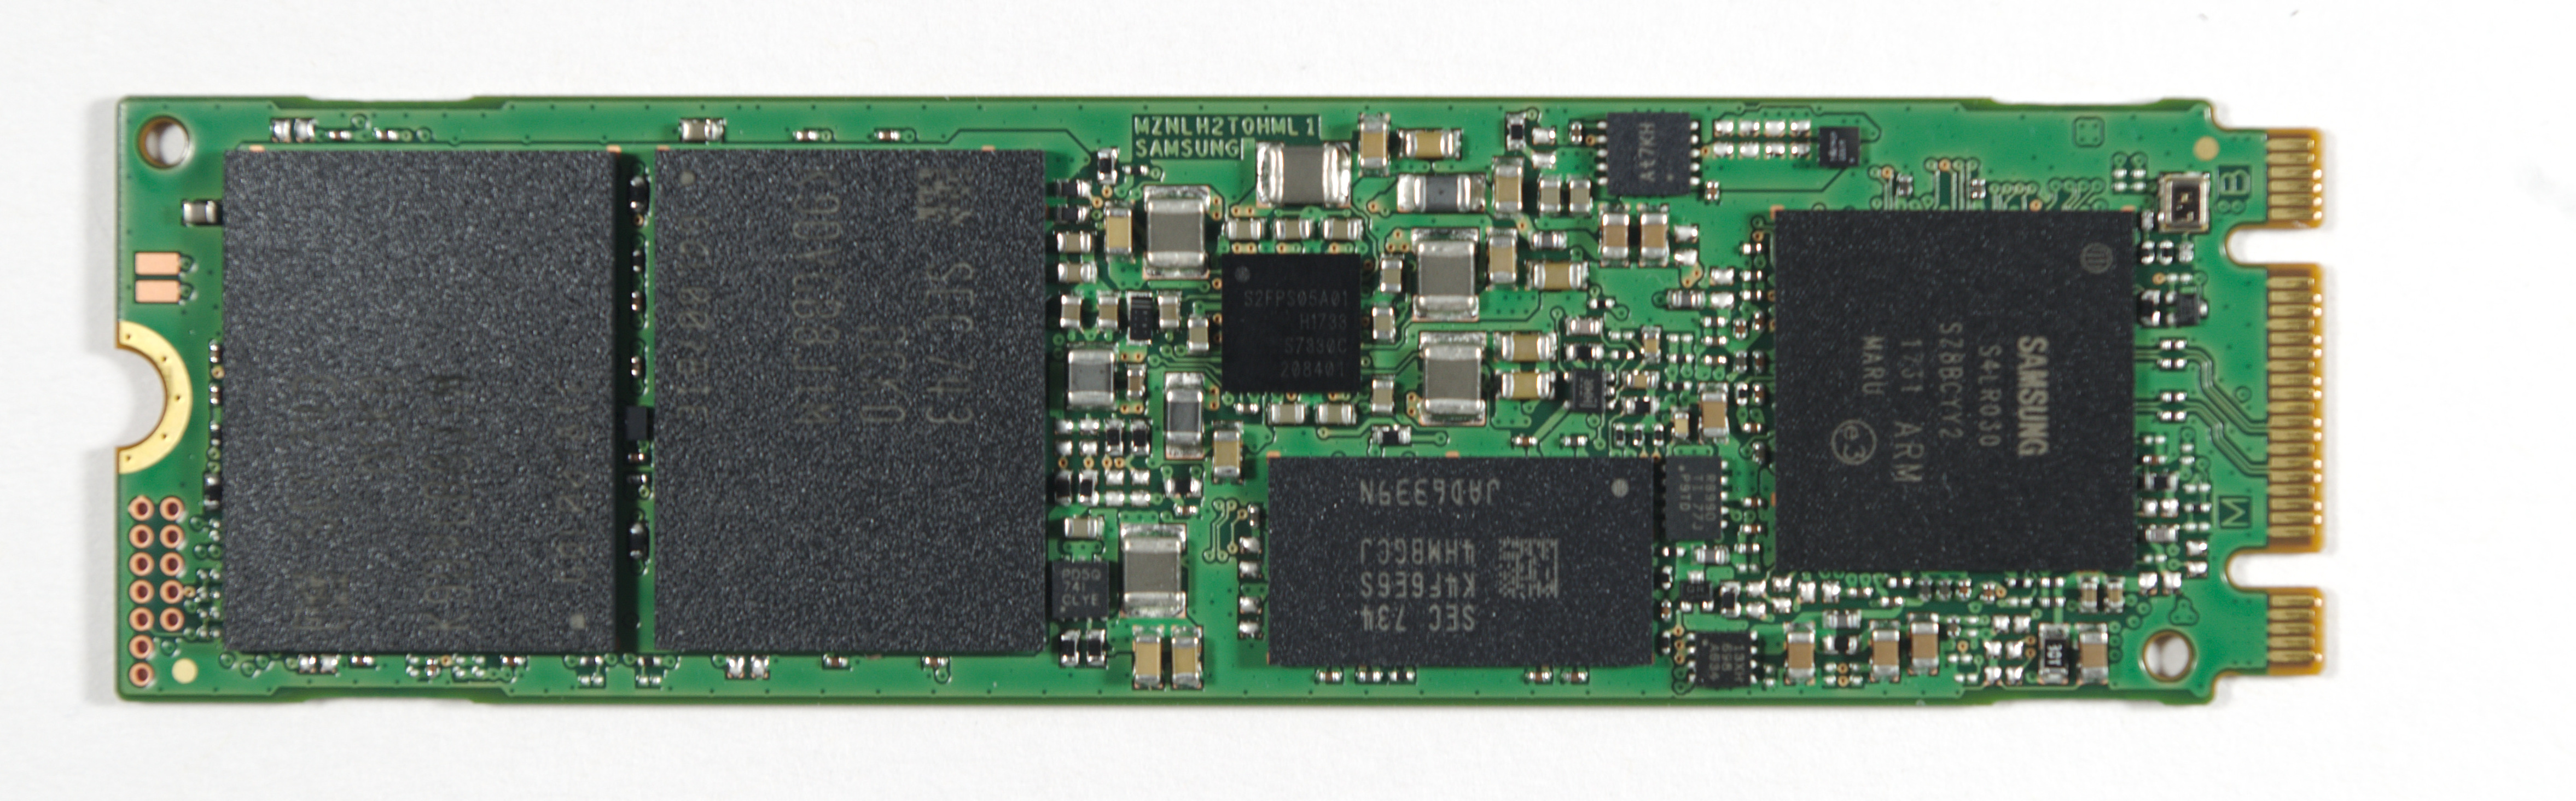 The Latest High-Capacity M.2: The Samsung 860 EVO 2TB SSD, Reviewed